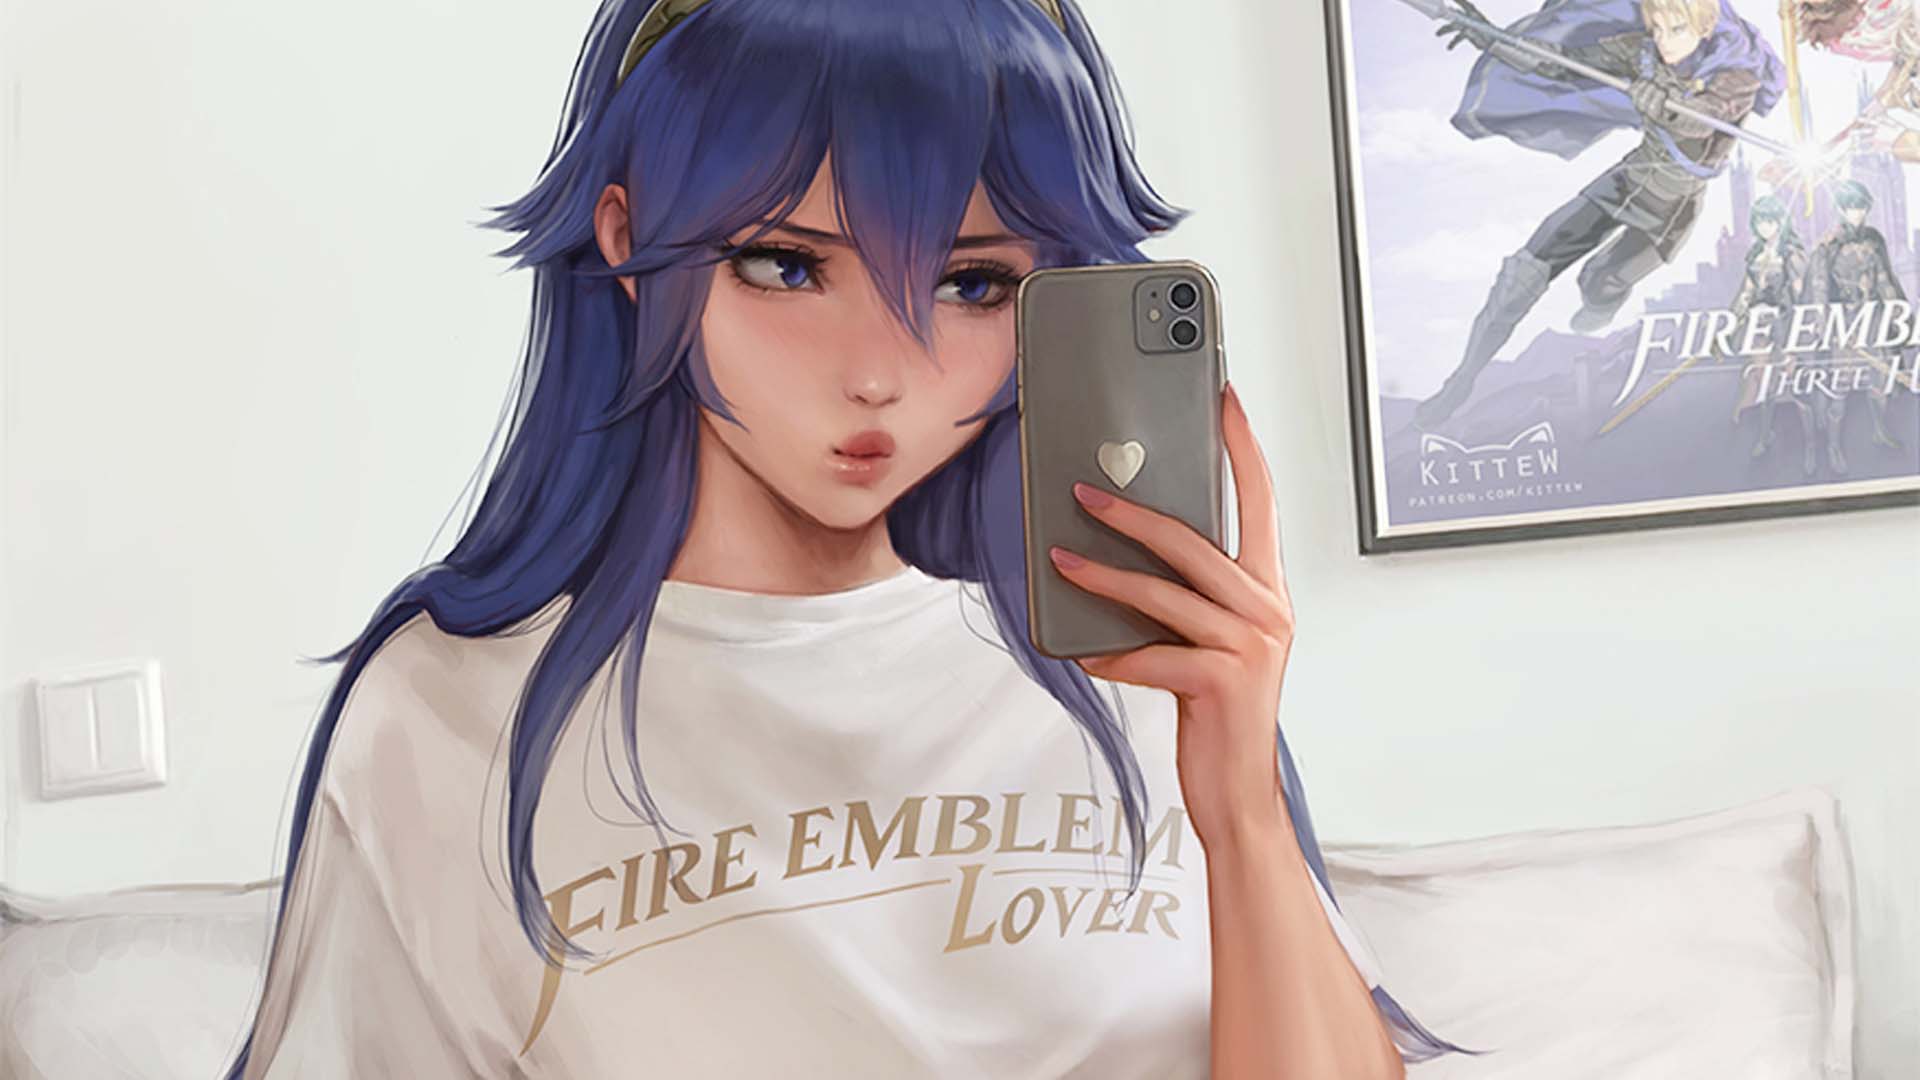 Lucina Mirror Selfie by Kittew - Image Abyss